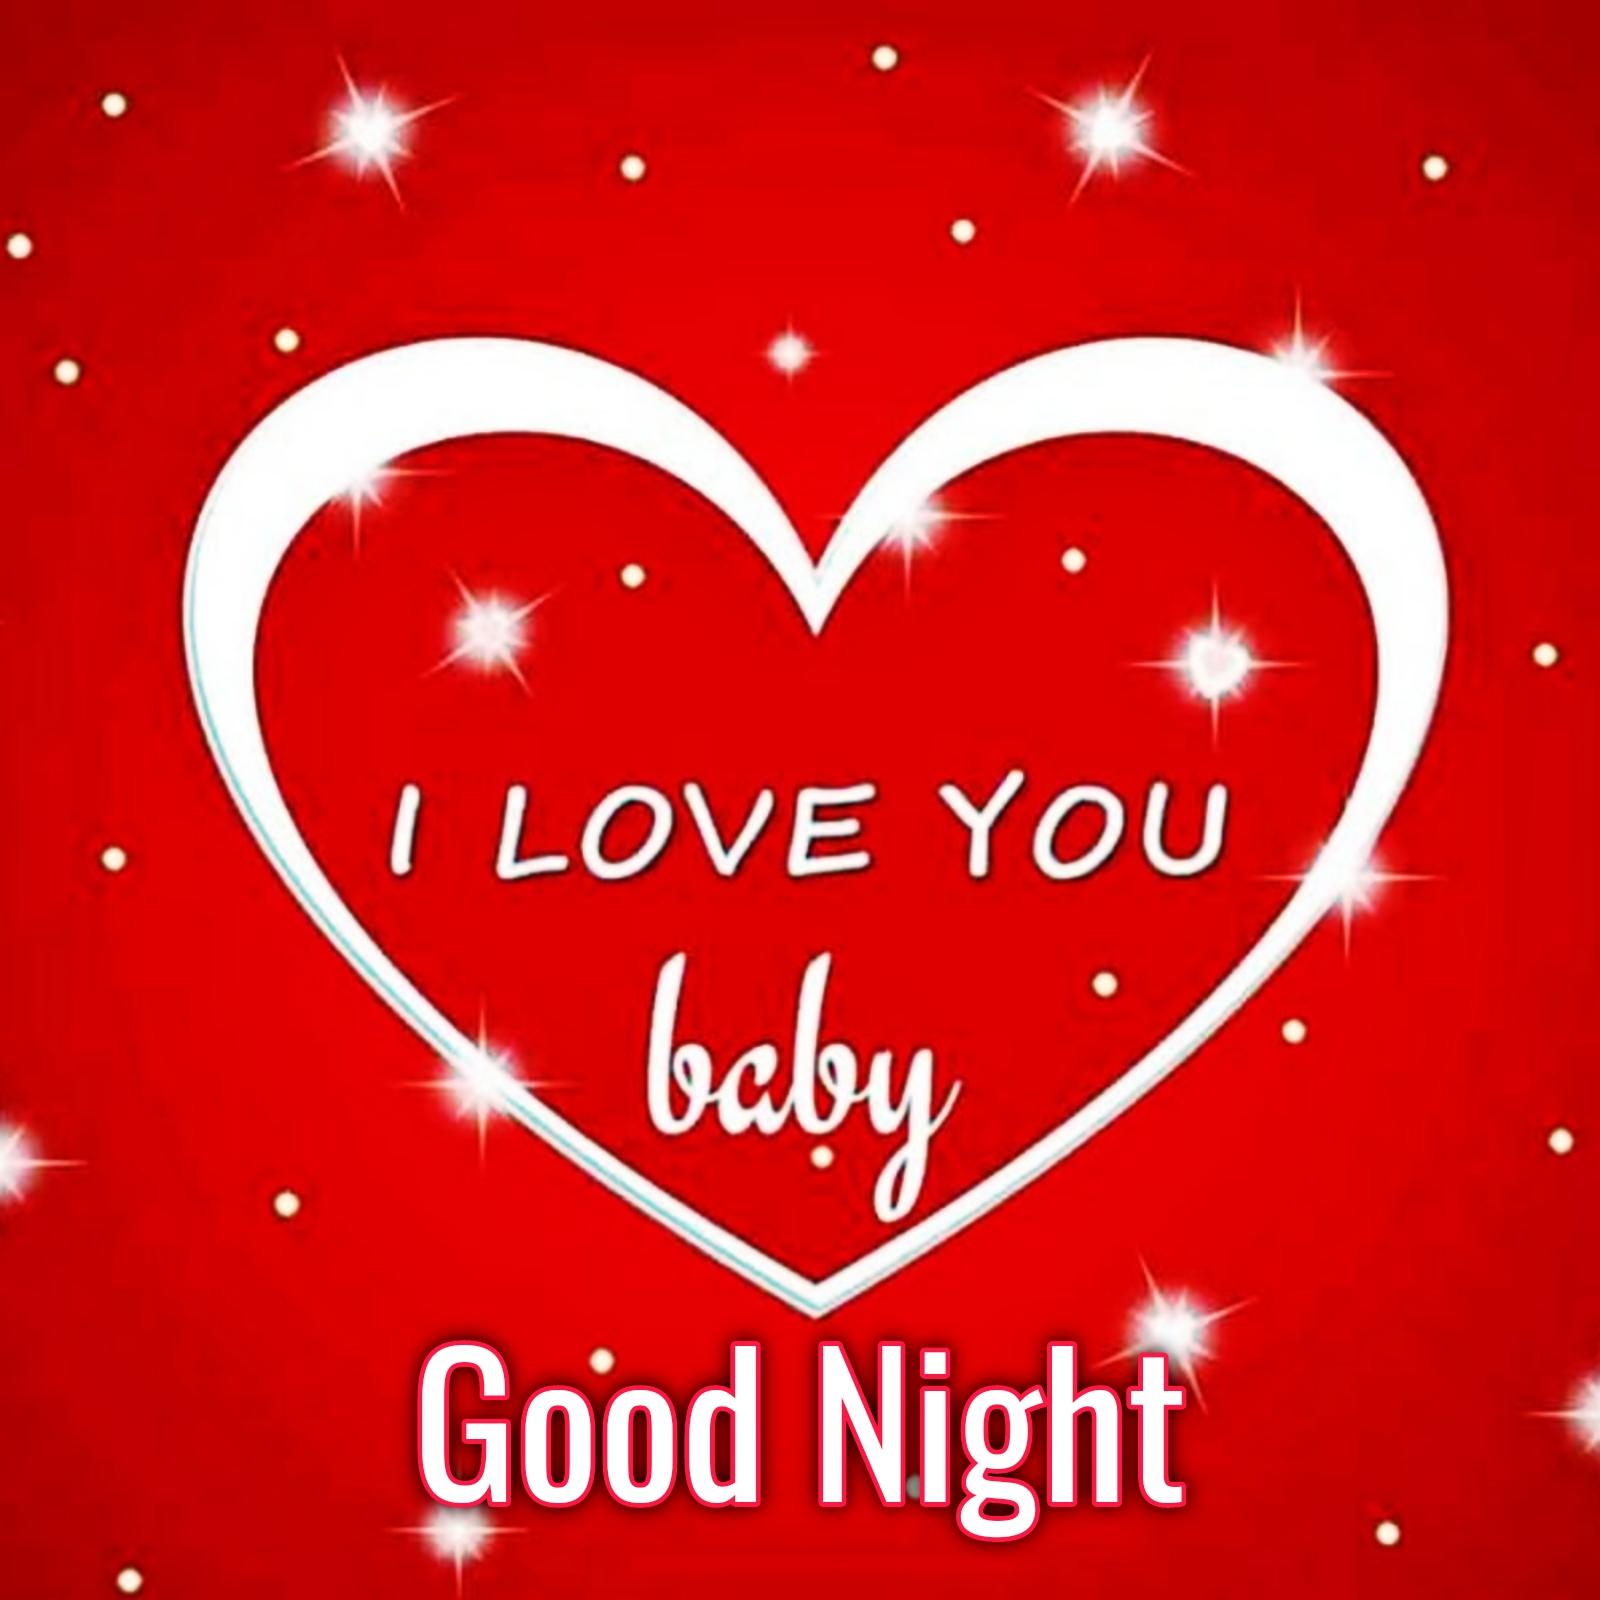 I Love You Baby Good Night Images 